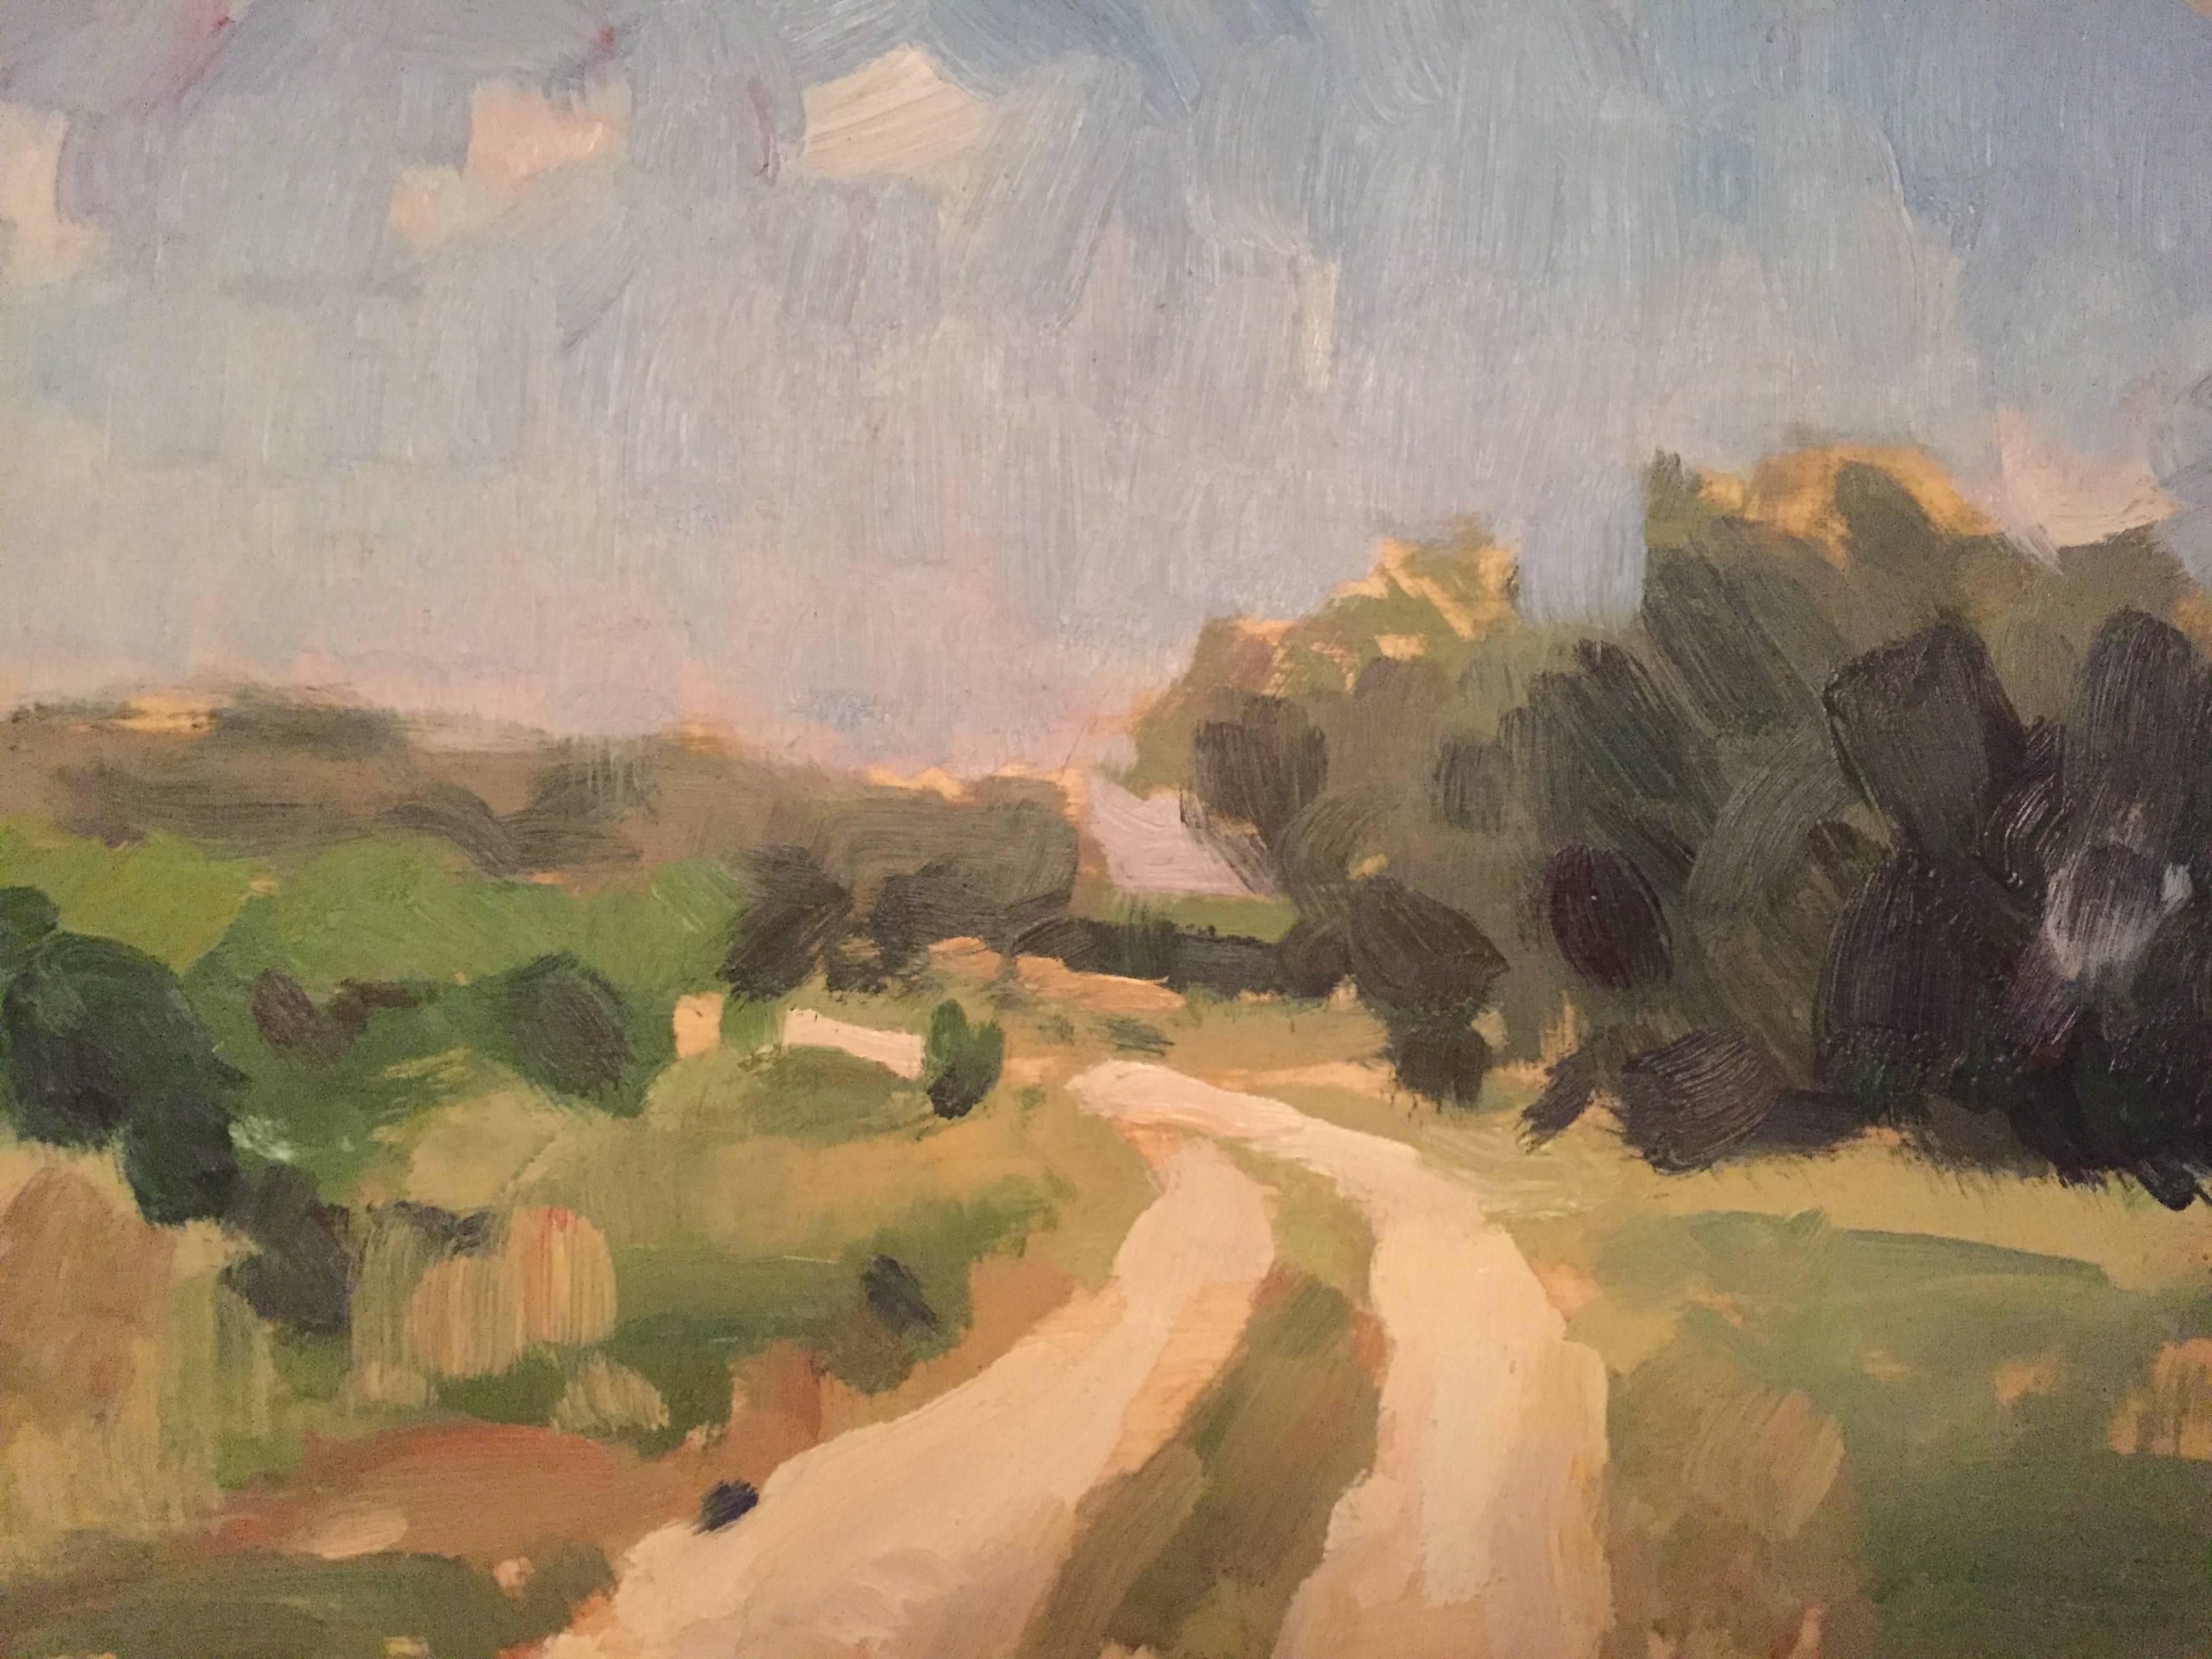 Painted en plein-air on a sunny day in Tuscany. A dirt road winds ahead and around a lush green meadow beneath a blue sky. This painting is unframed. Frame comes at additional cost.

Ben Fenske (b. 1978) although a native of Minnesota, and has been